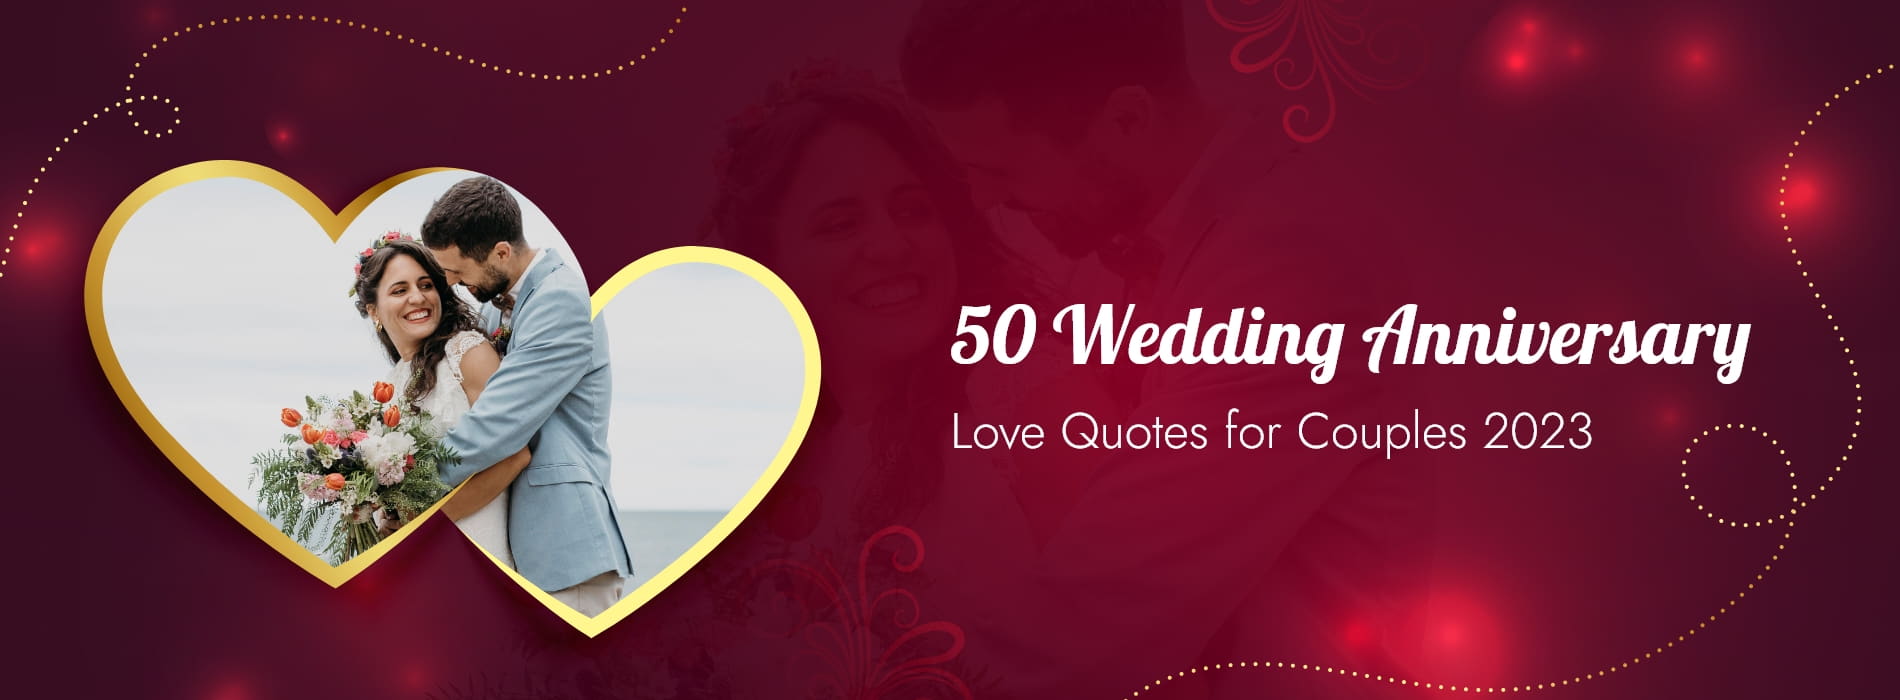 happy anniversary quotes for couples